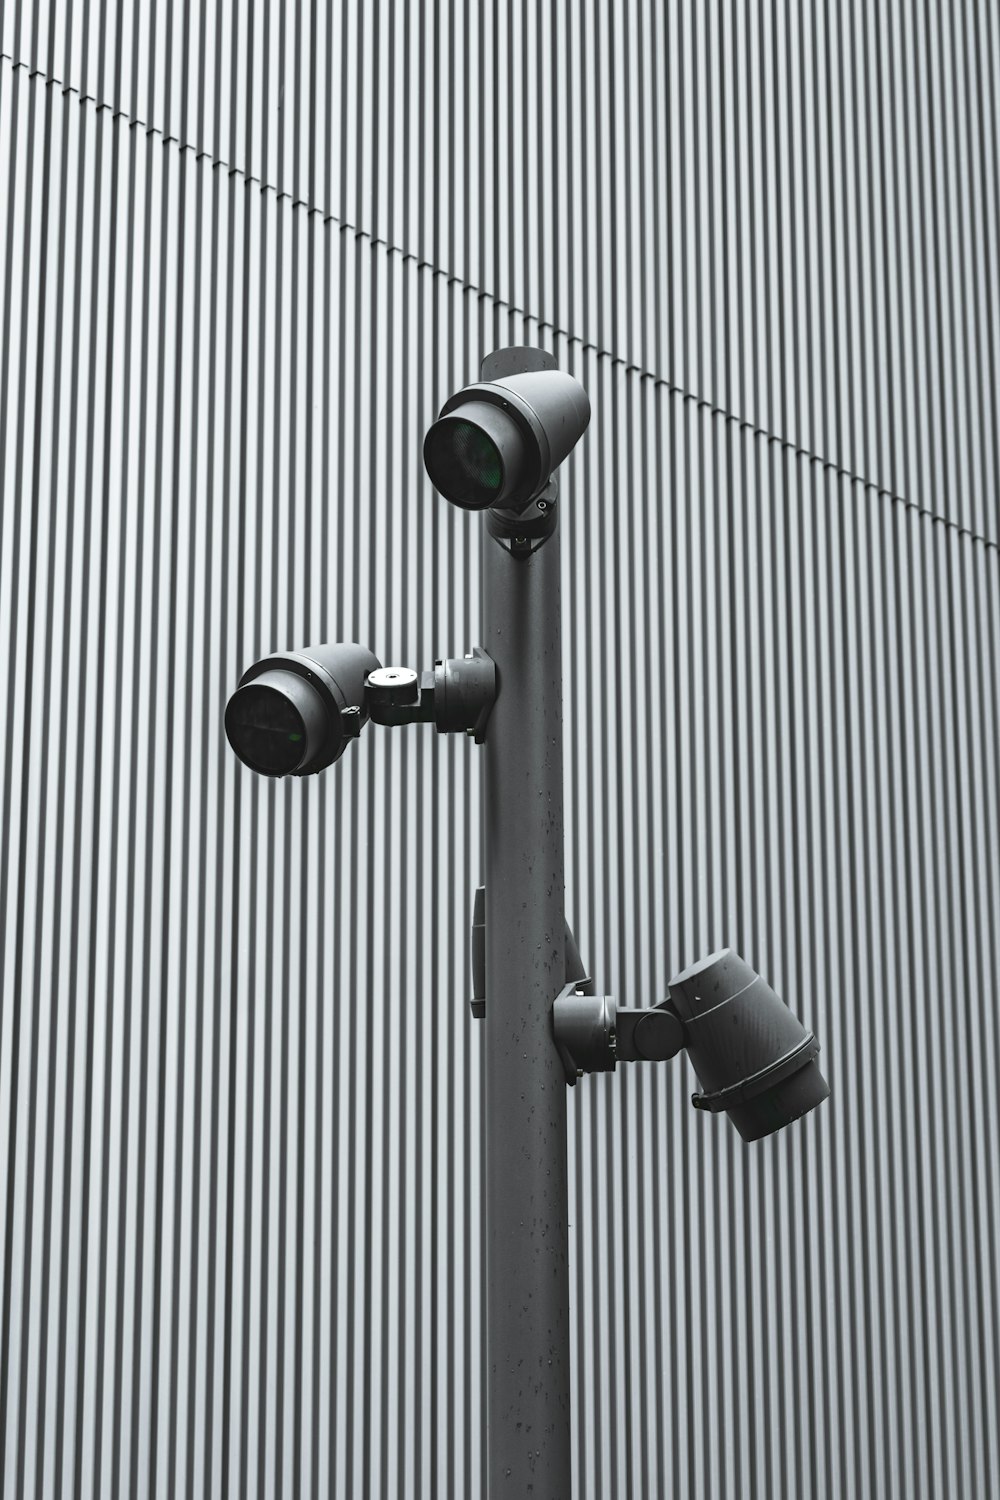 three cameras on a pole in front of a building